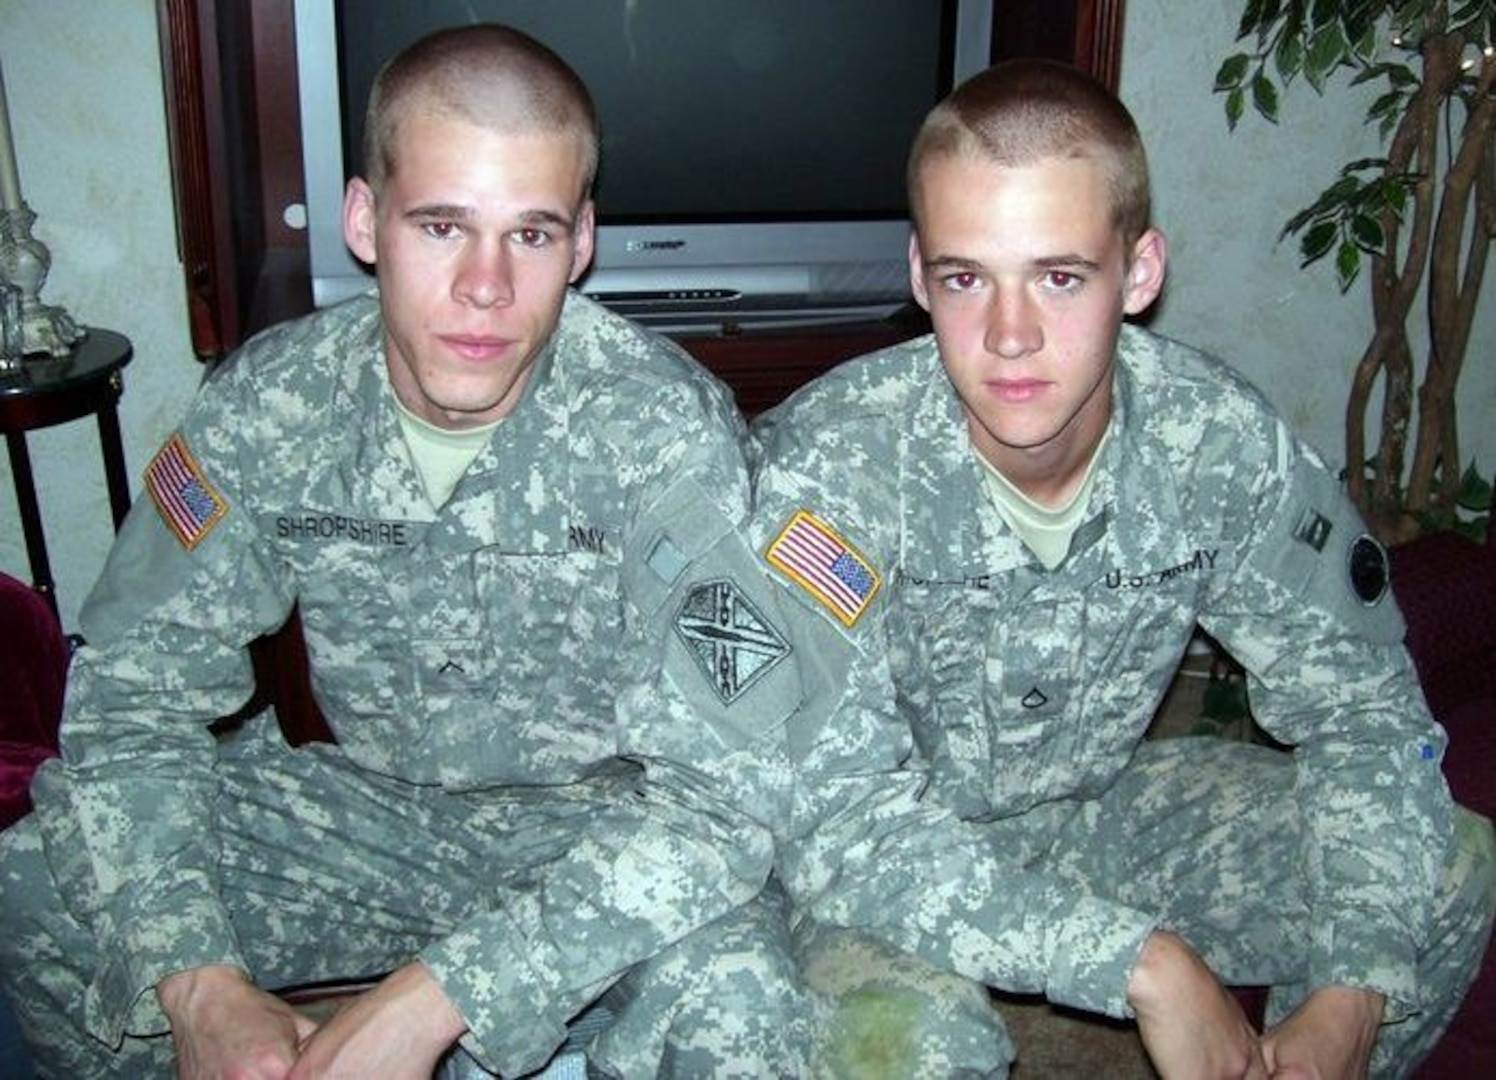 Army Spc. Stephen Shropshire (right) and brother Army Pfc. Joshua B. Shropshire pose stateside for a family photo December 2010. Stephen has since joined the active Army and both have been promoted and are currently deployed to separate posts in Afghanistan.